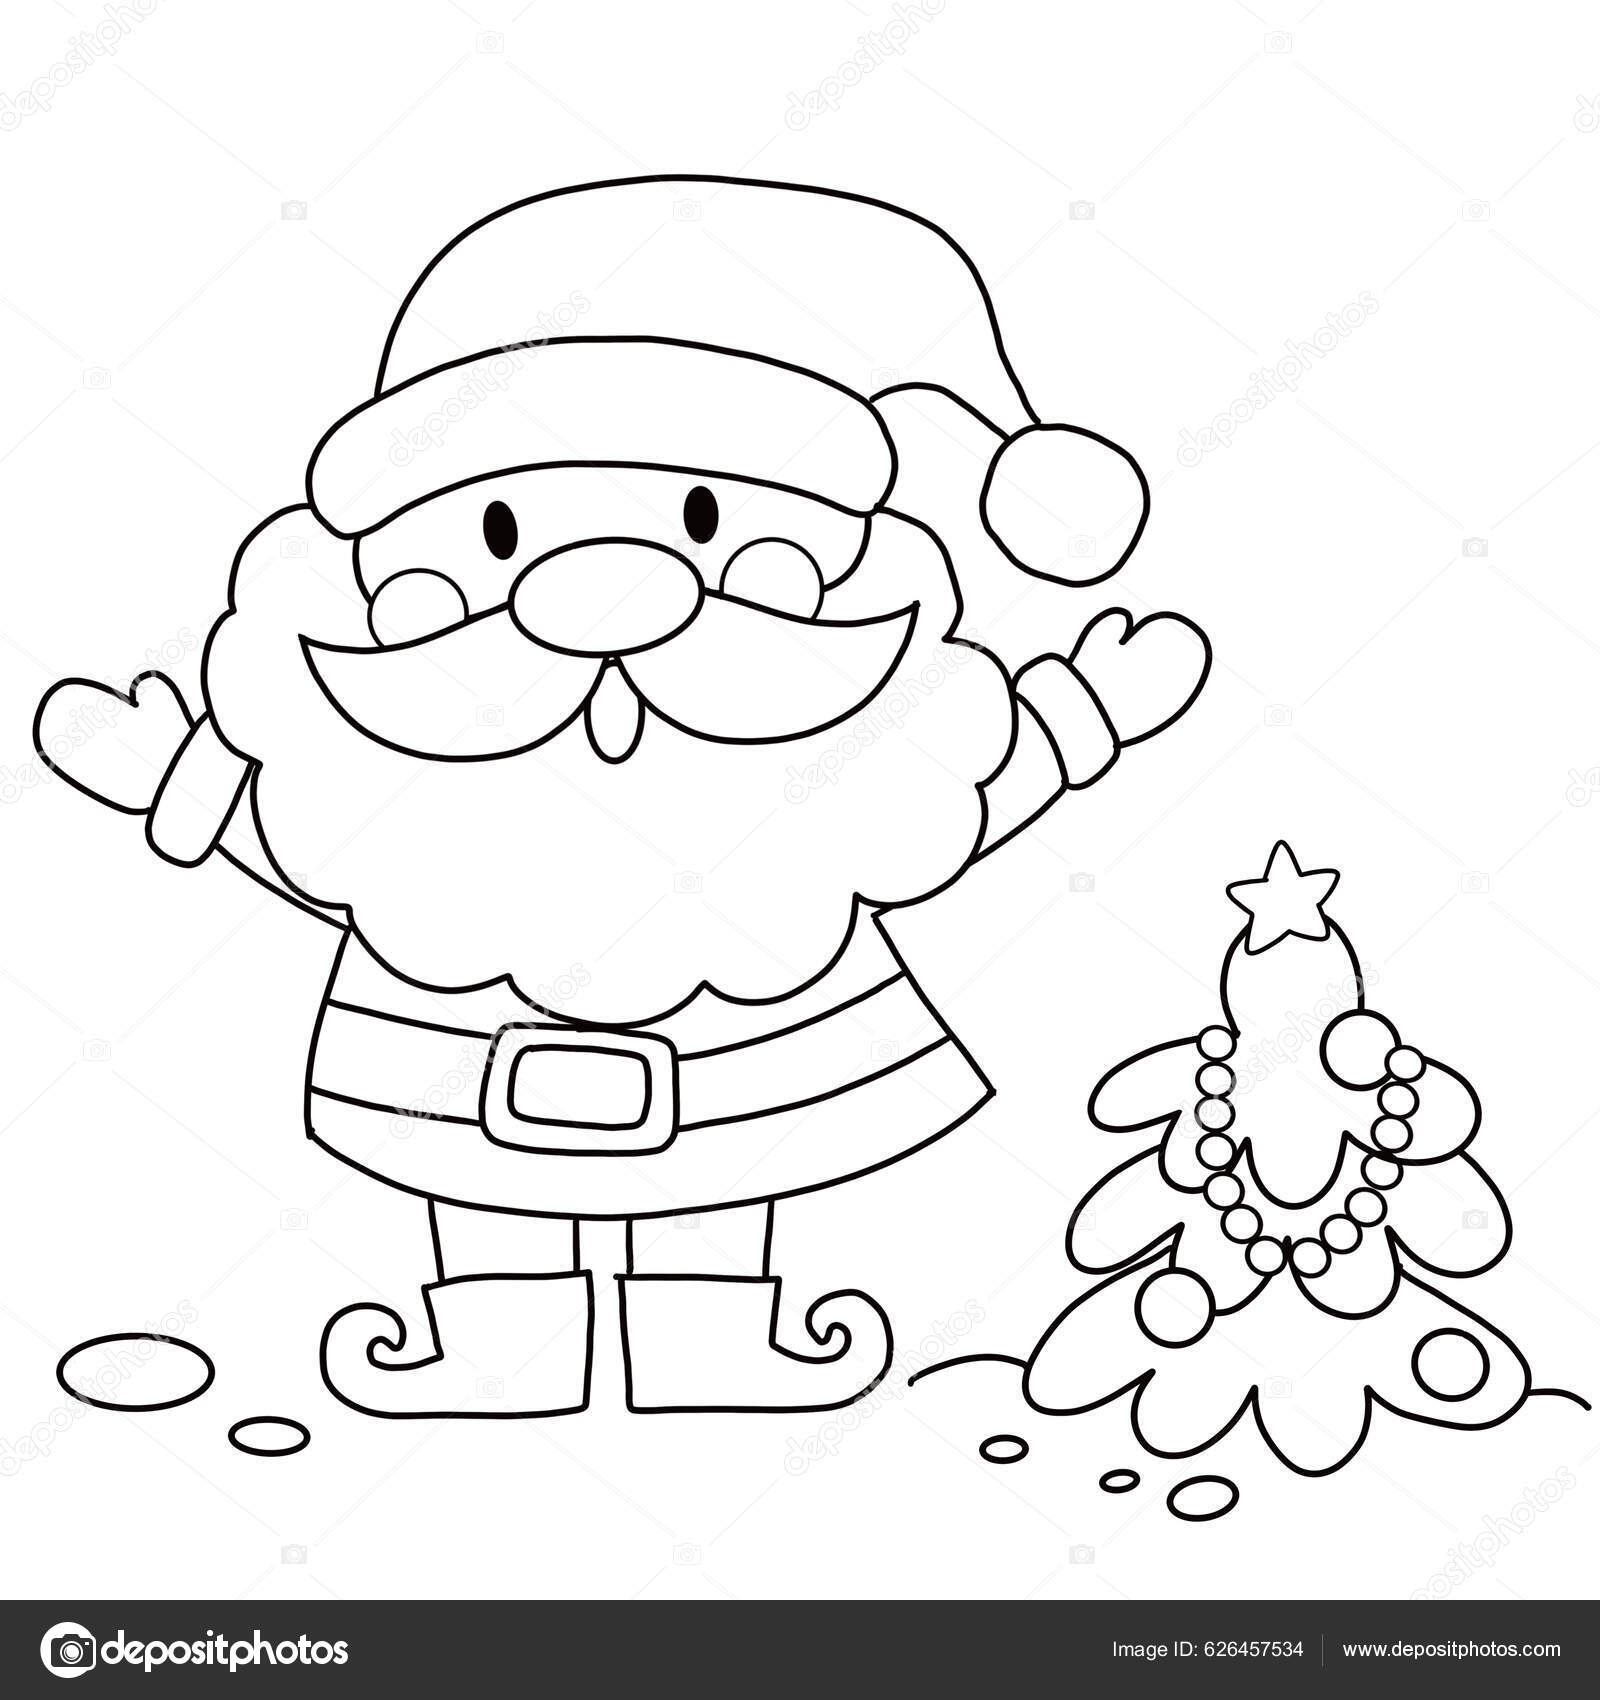 Merry christmas christmas santa claus isolated coloring page kids stock vector by george